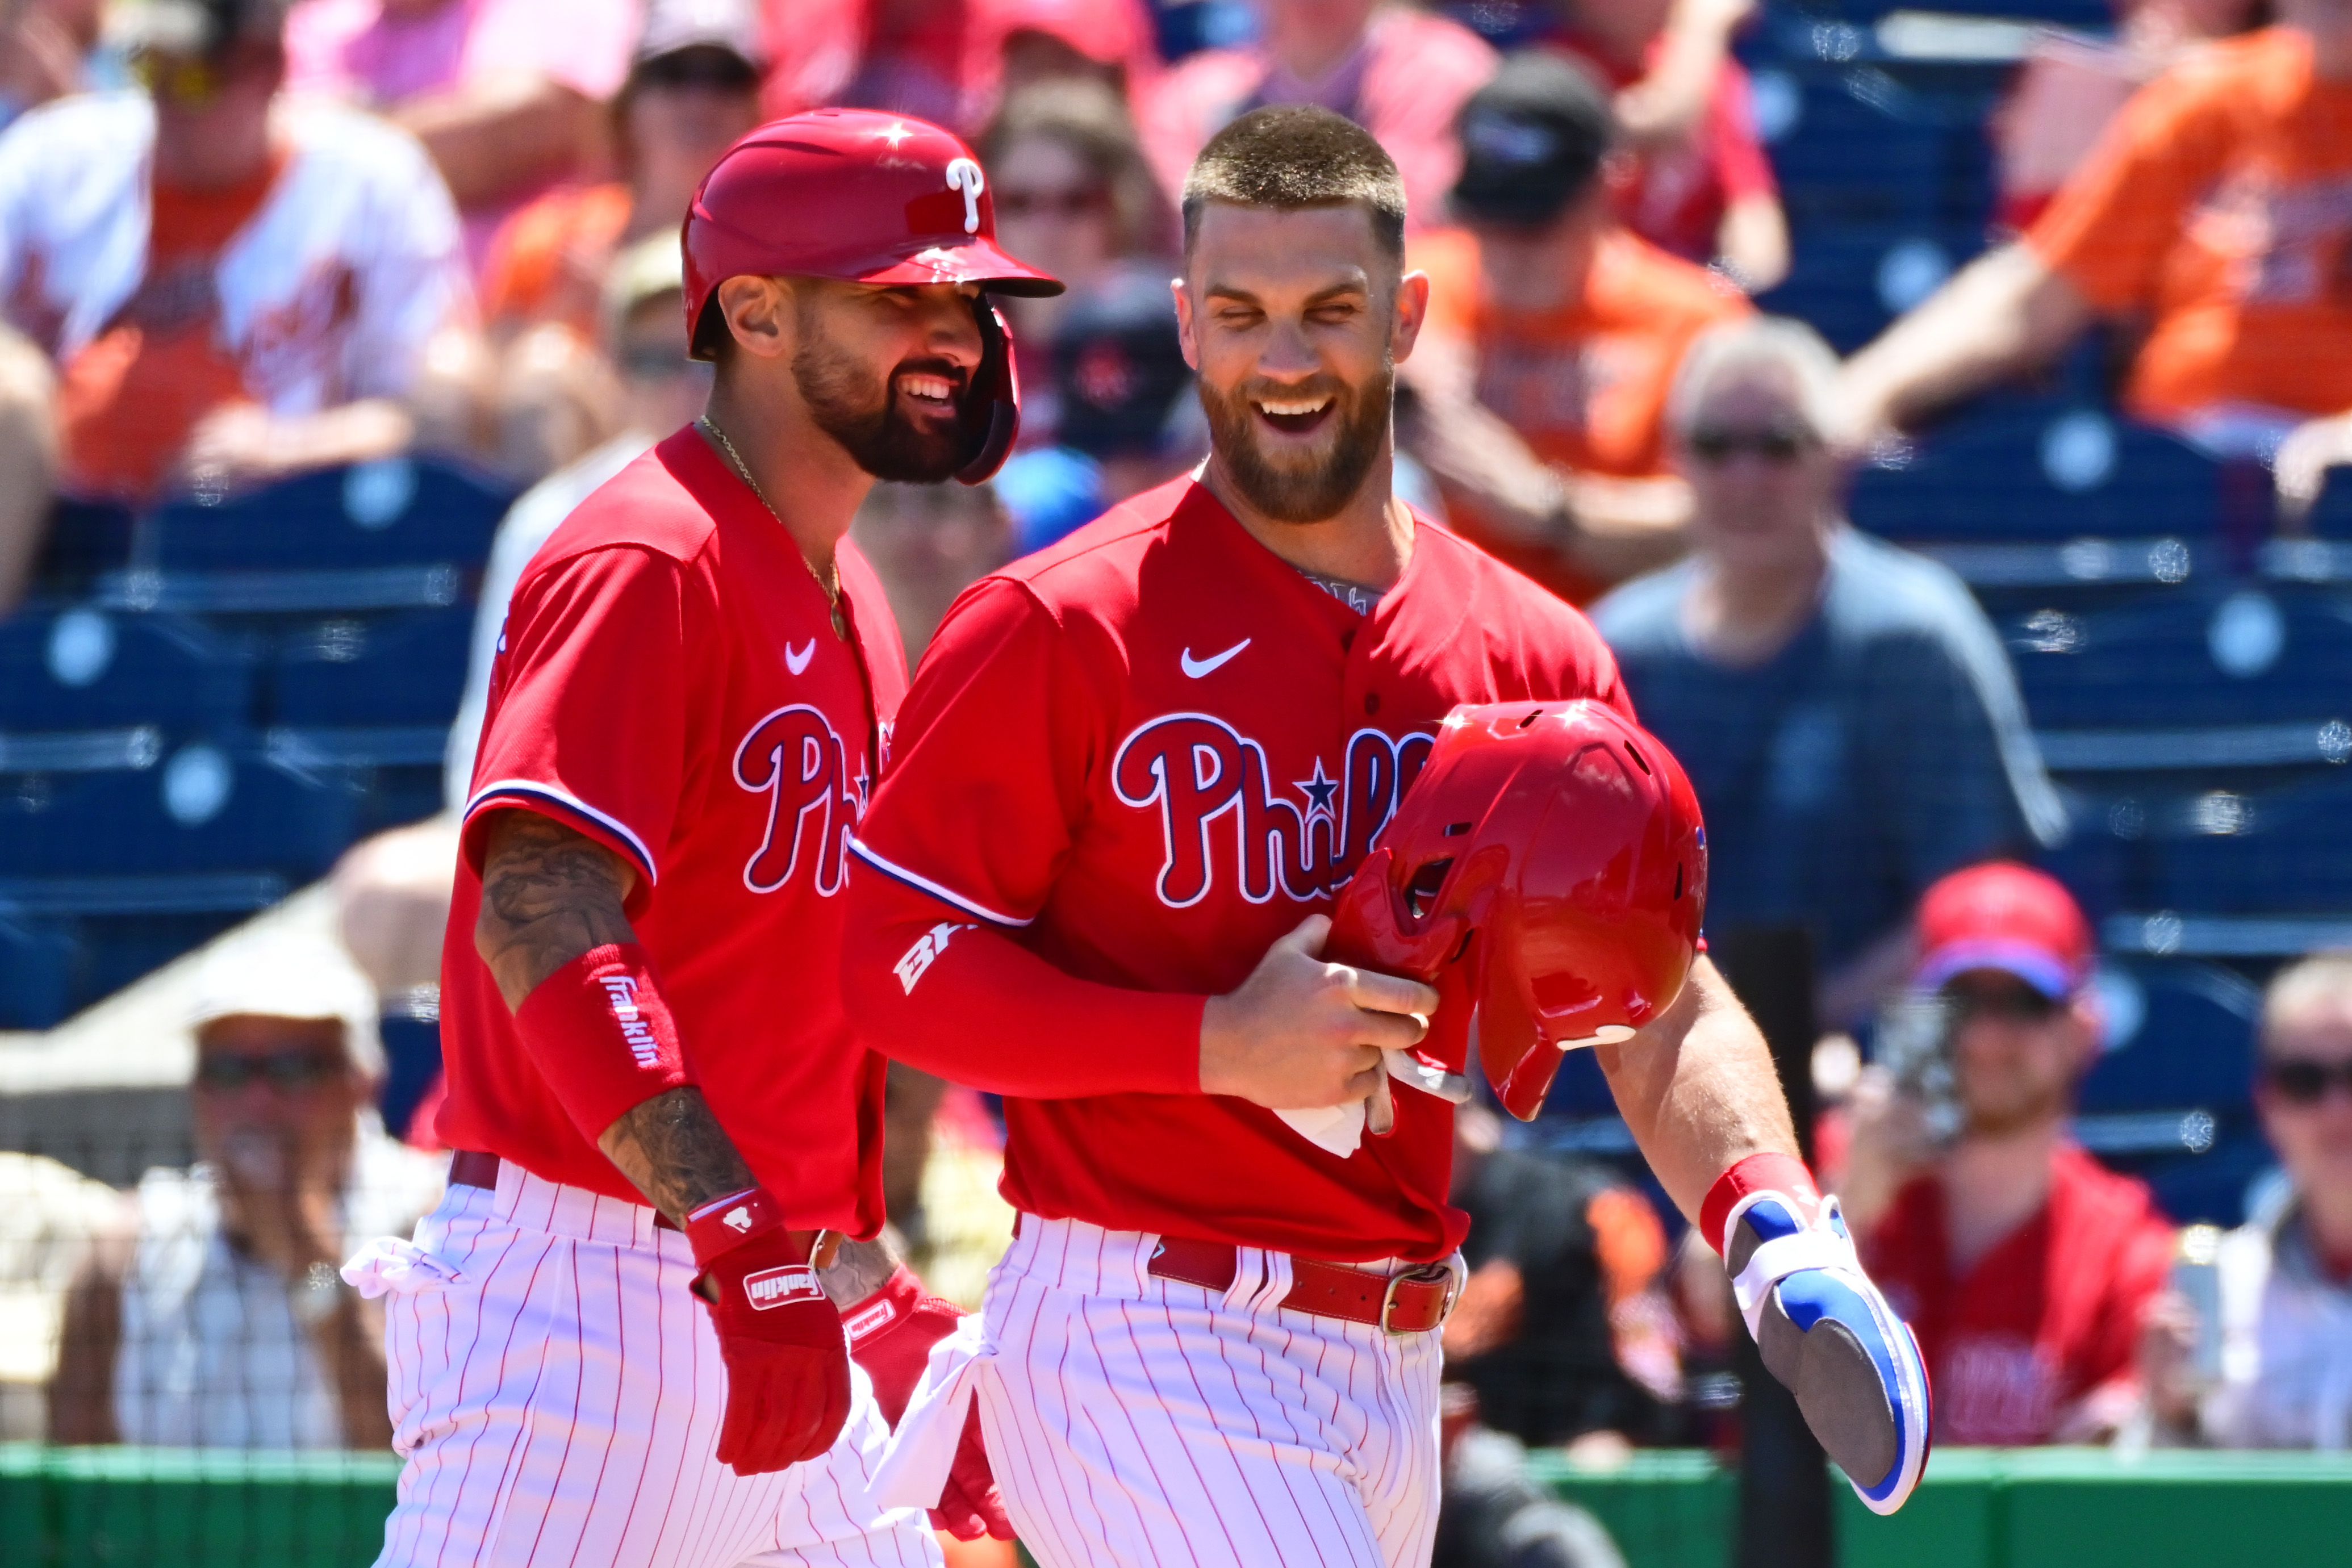 Bryce Harper to return to Phillies earlier than expected